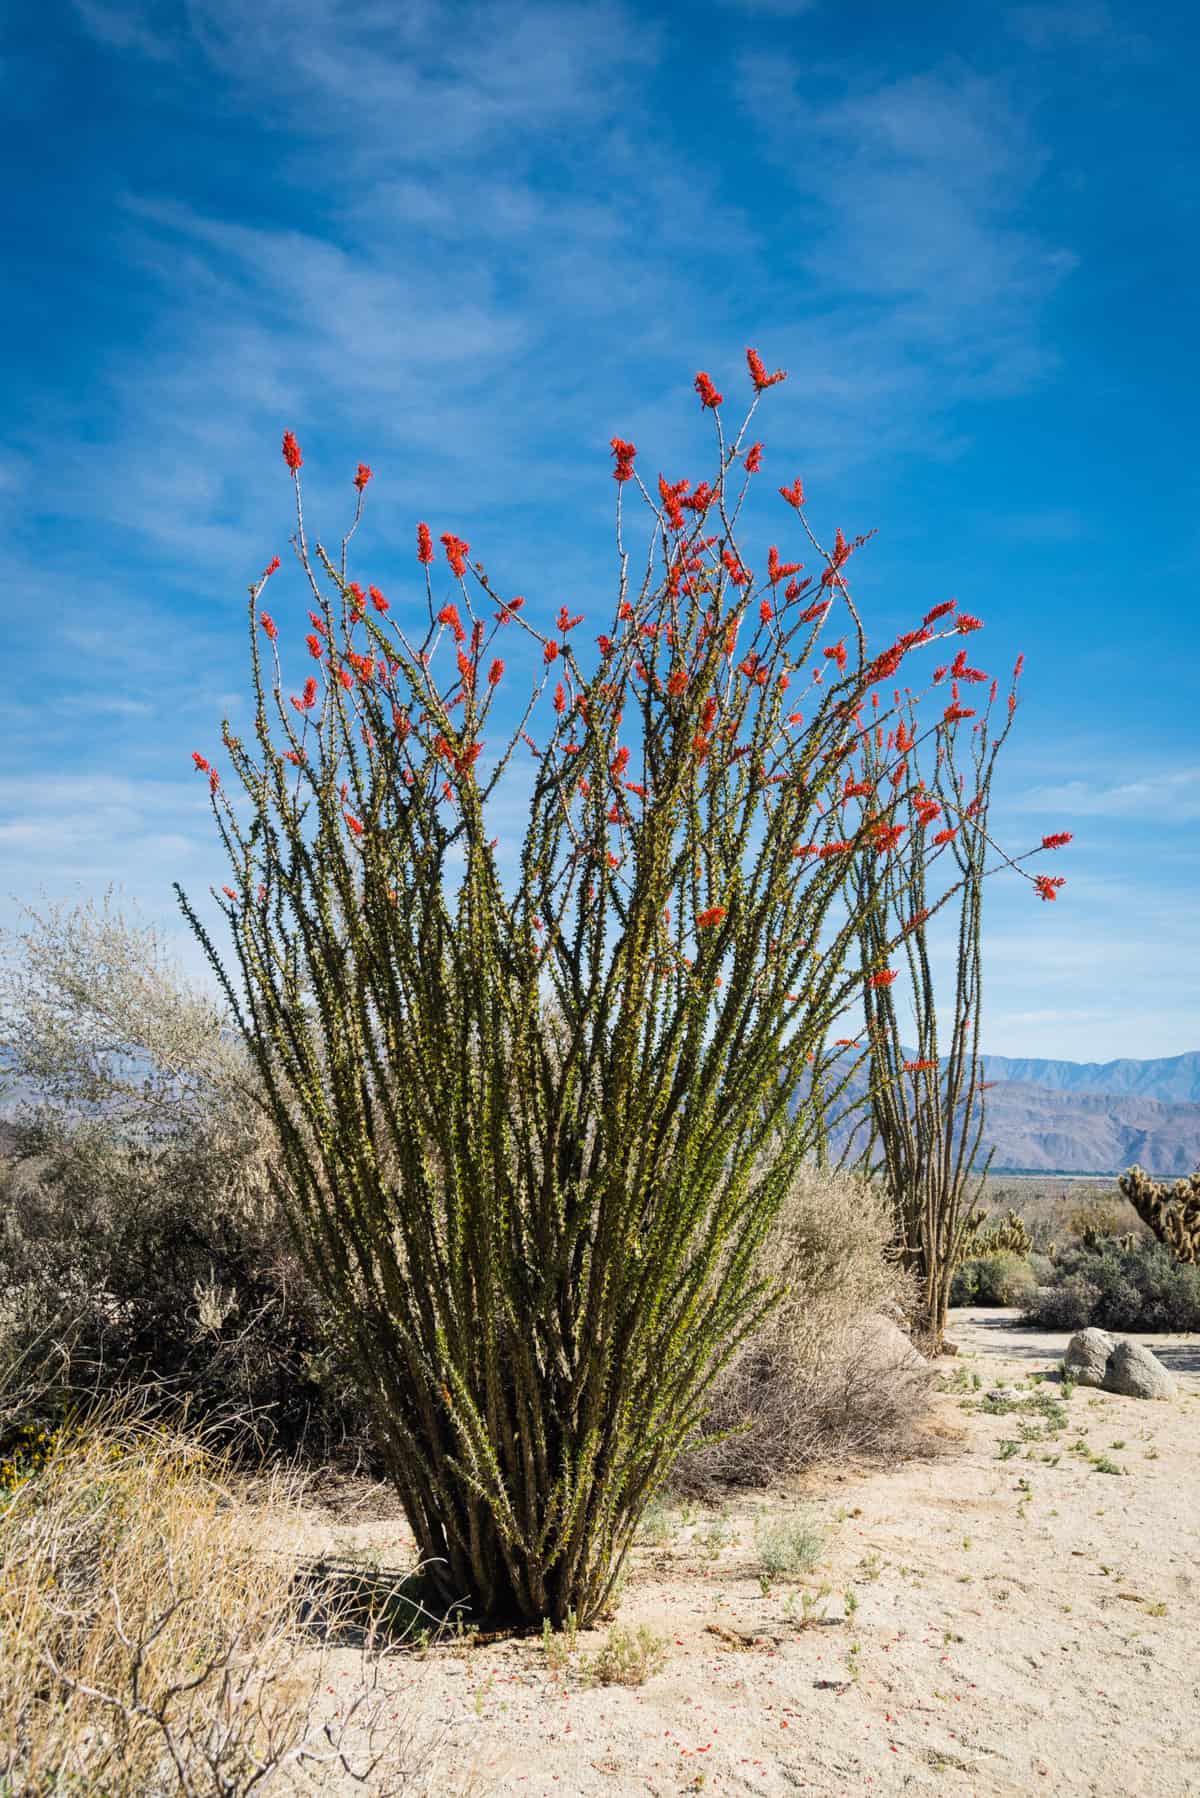 ocotillo plant blooming in the desert